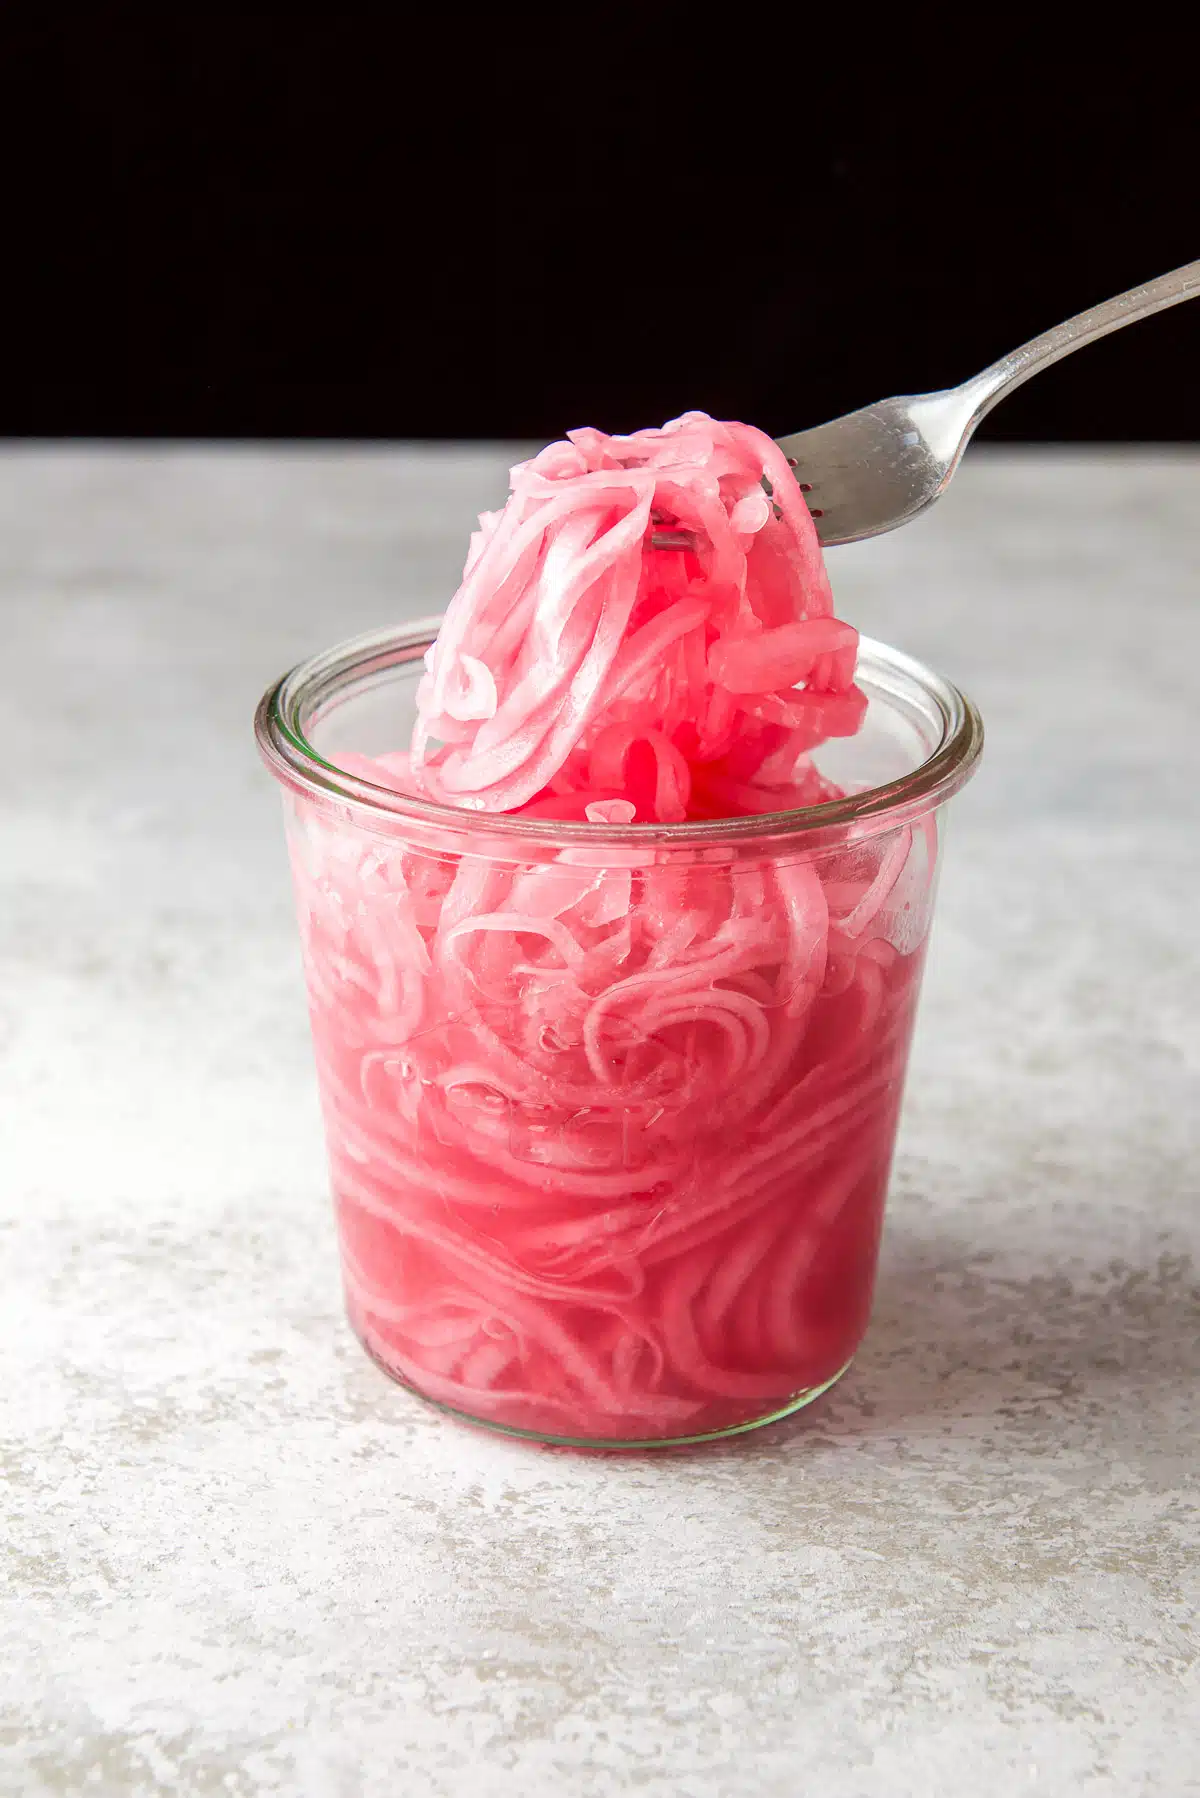 A fork holding the onions out of the jar of pickled red onions